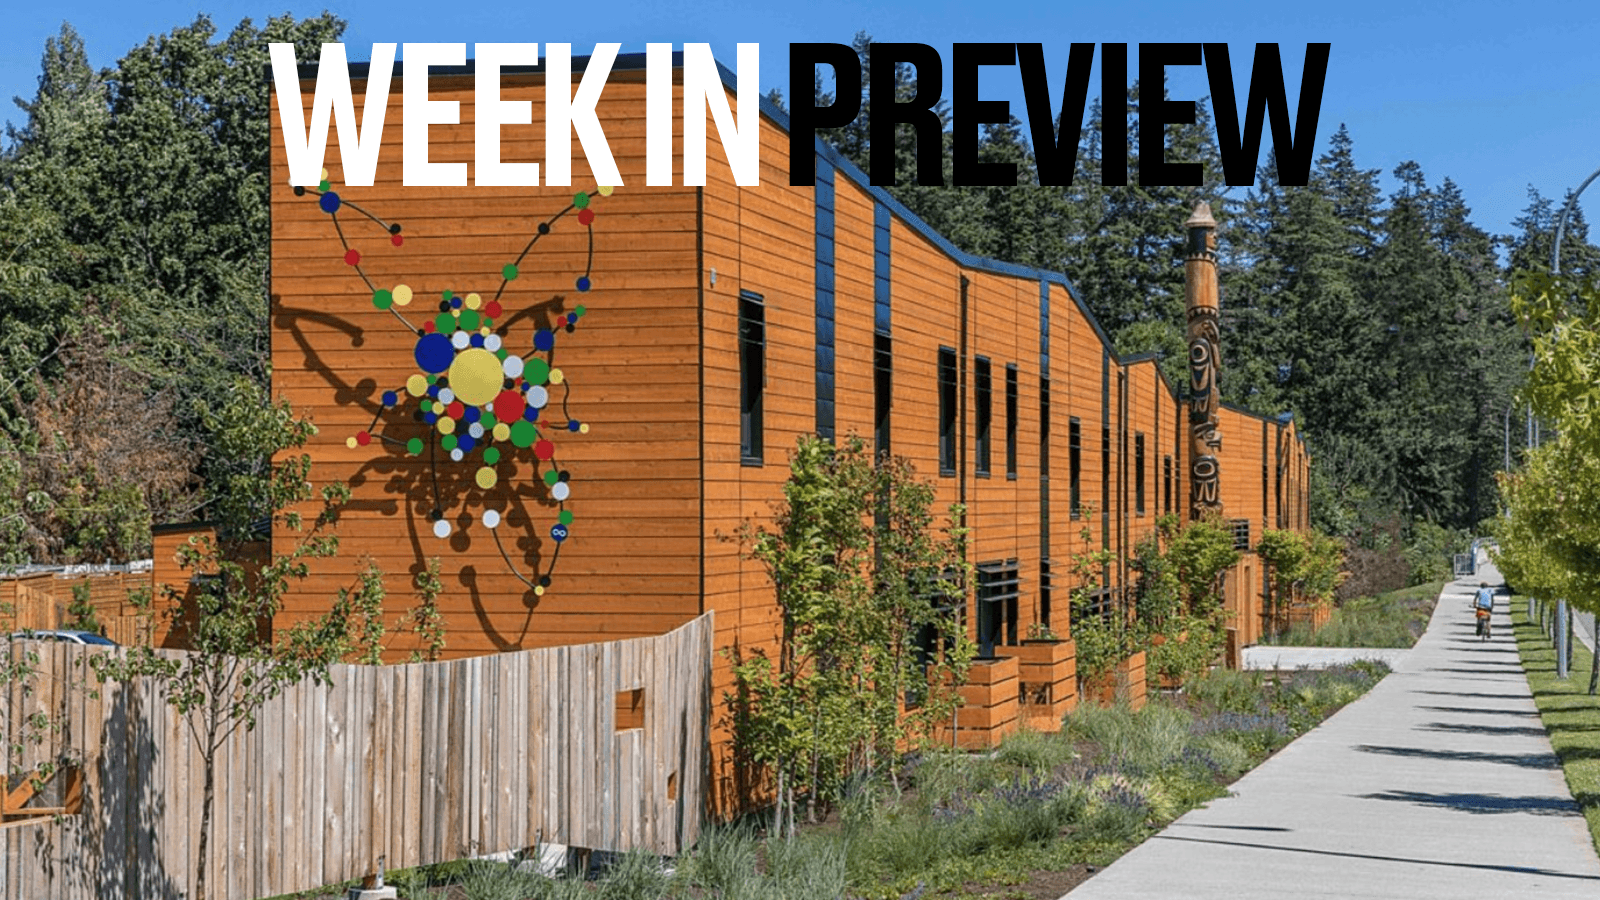 Passive House Week In Preview: December 20